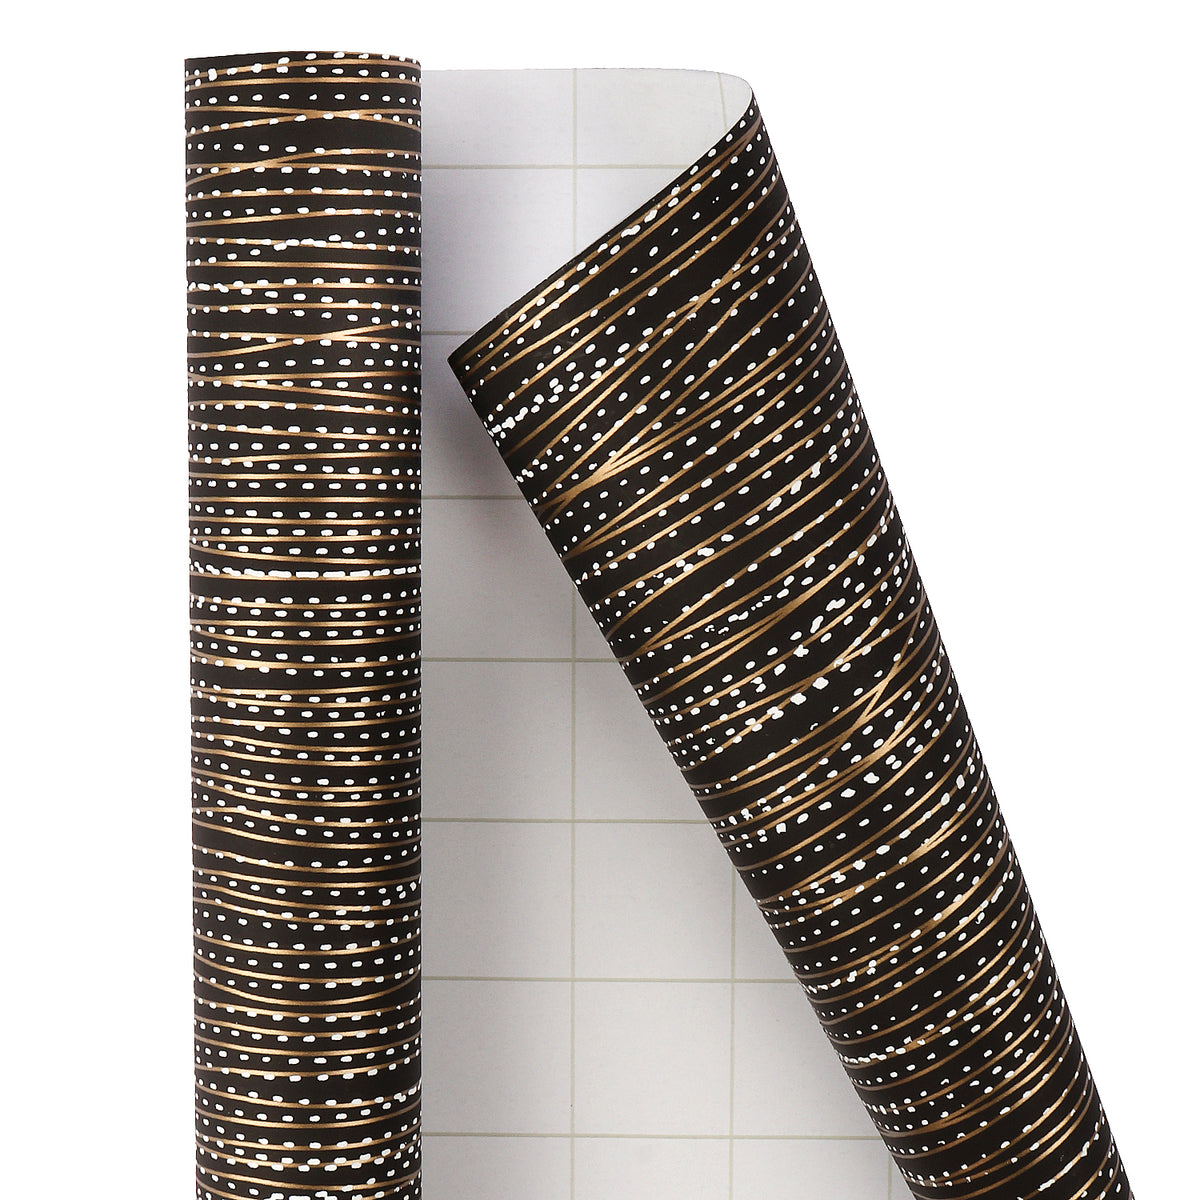 Wrapaholic 3 Different Black Gold Stripe Design Wrapping Paper